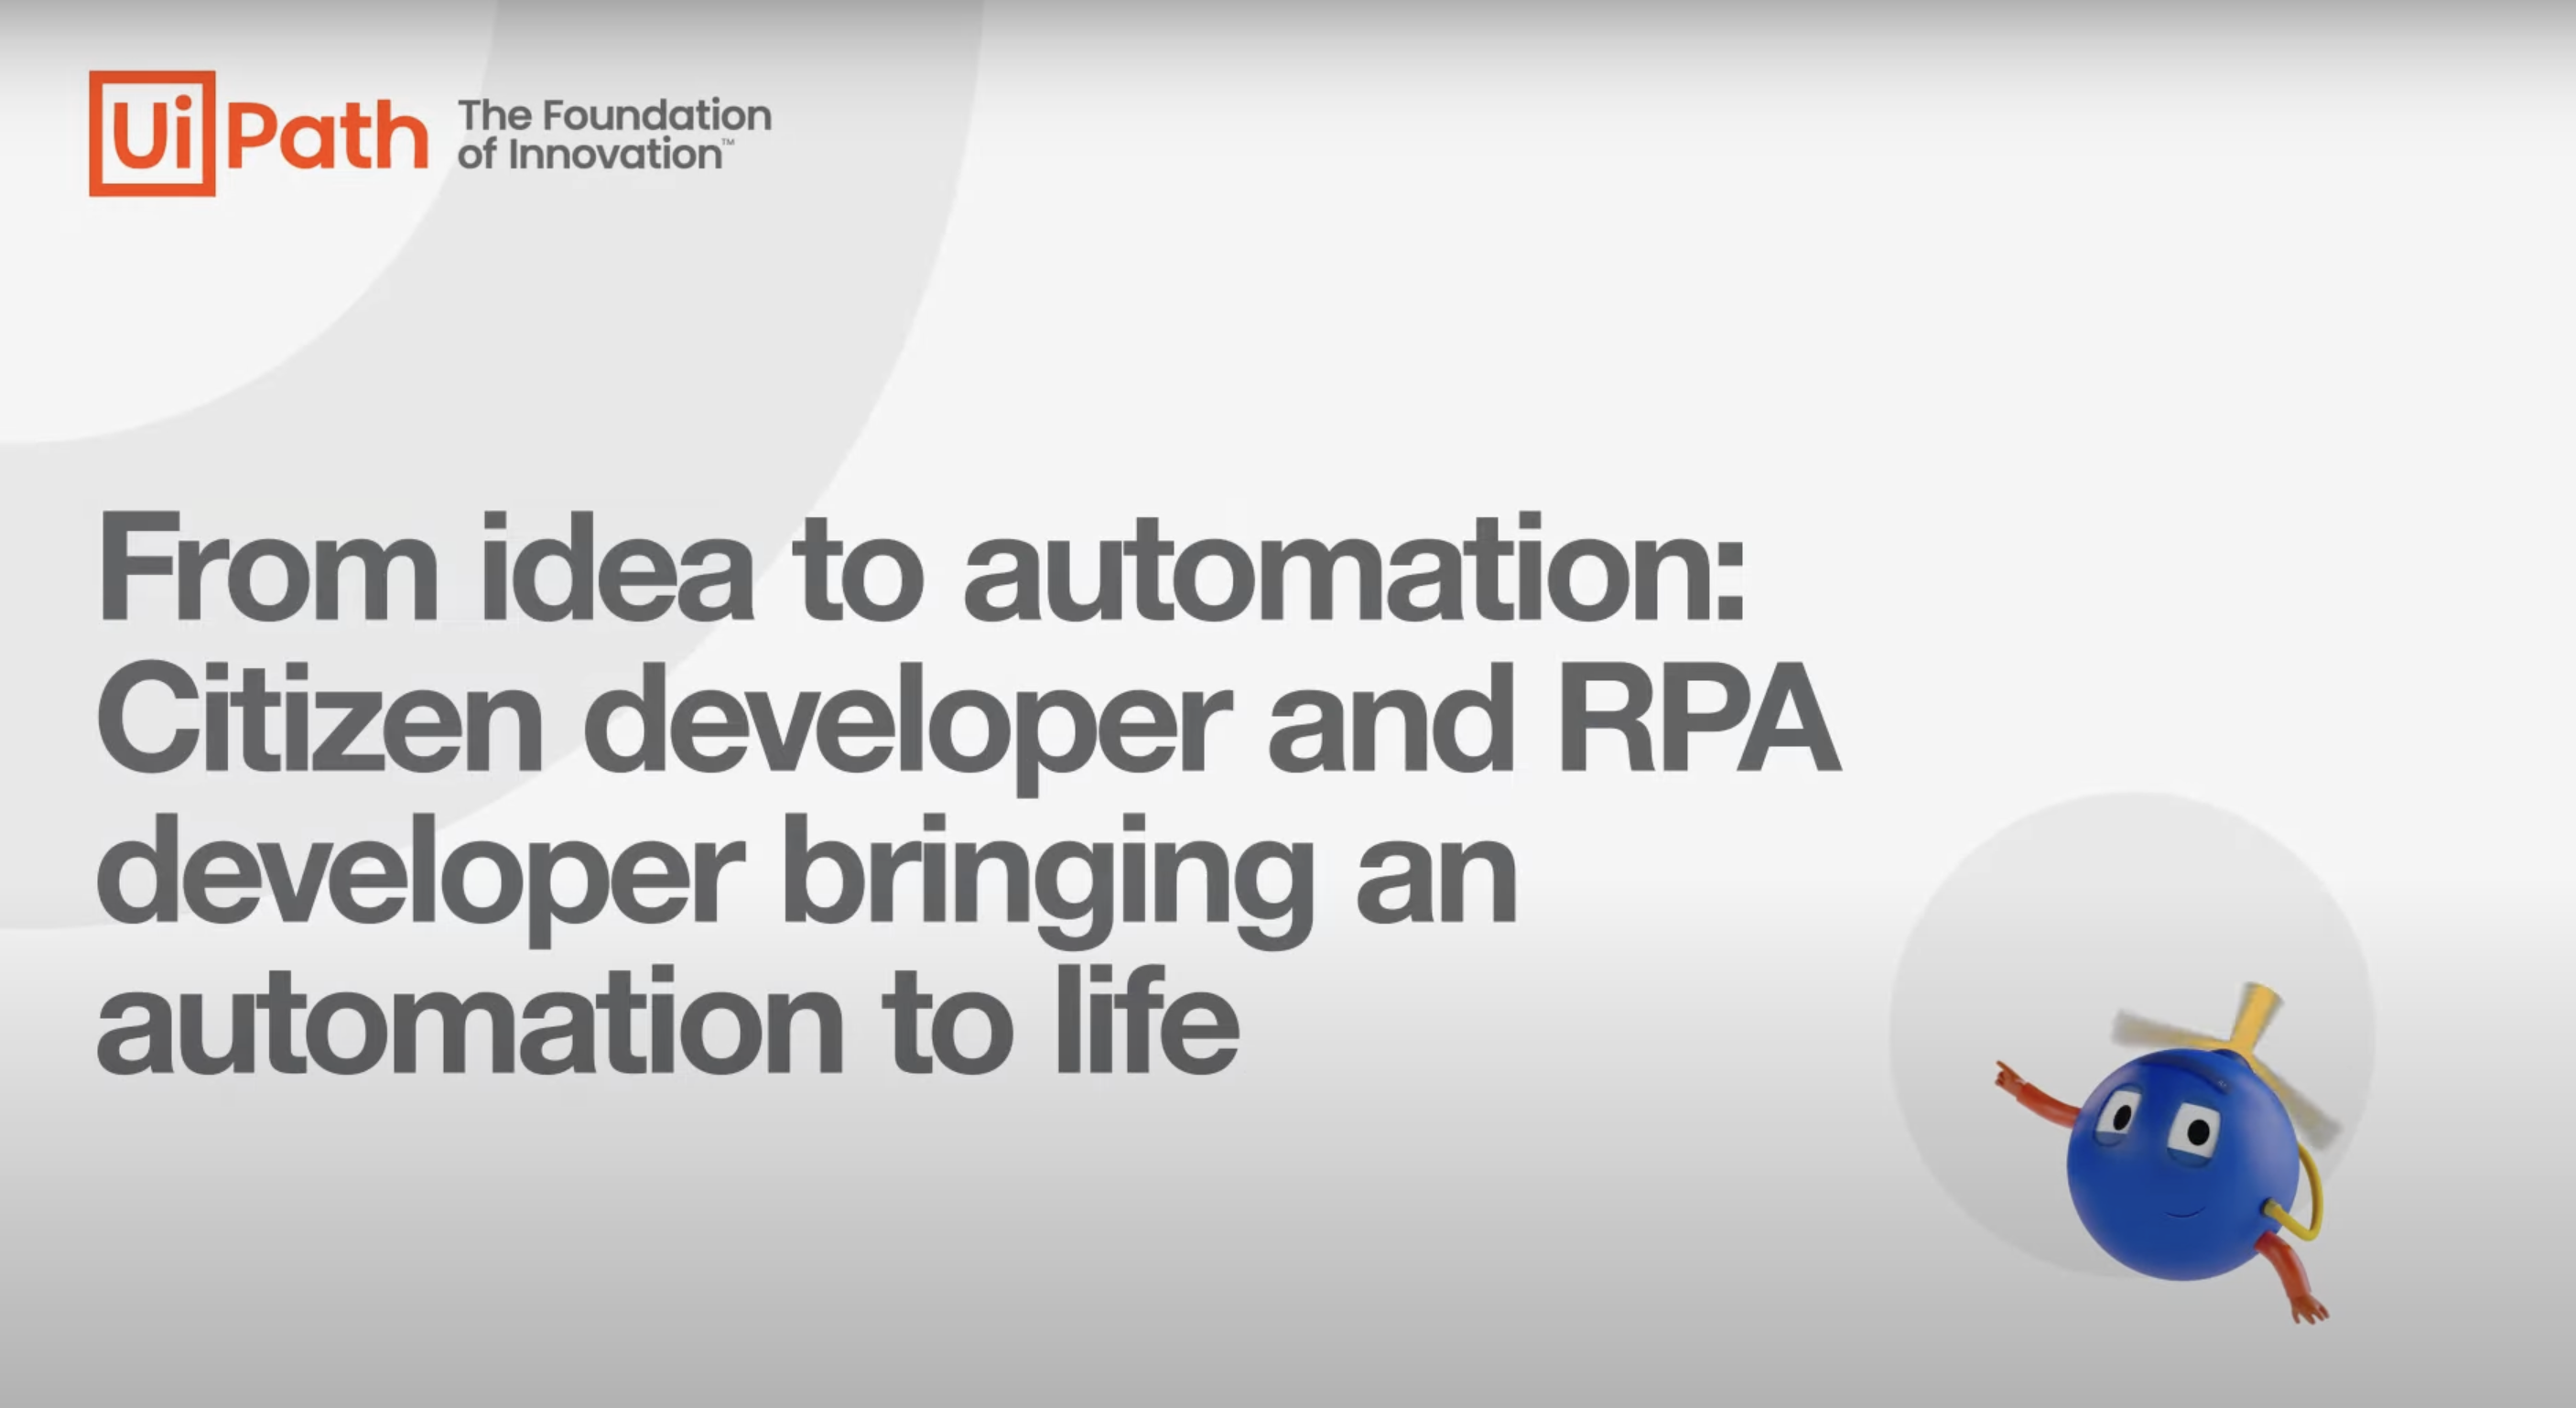 Citizen developer and RPA developer bringing an automation to life